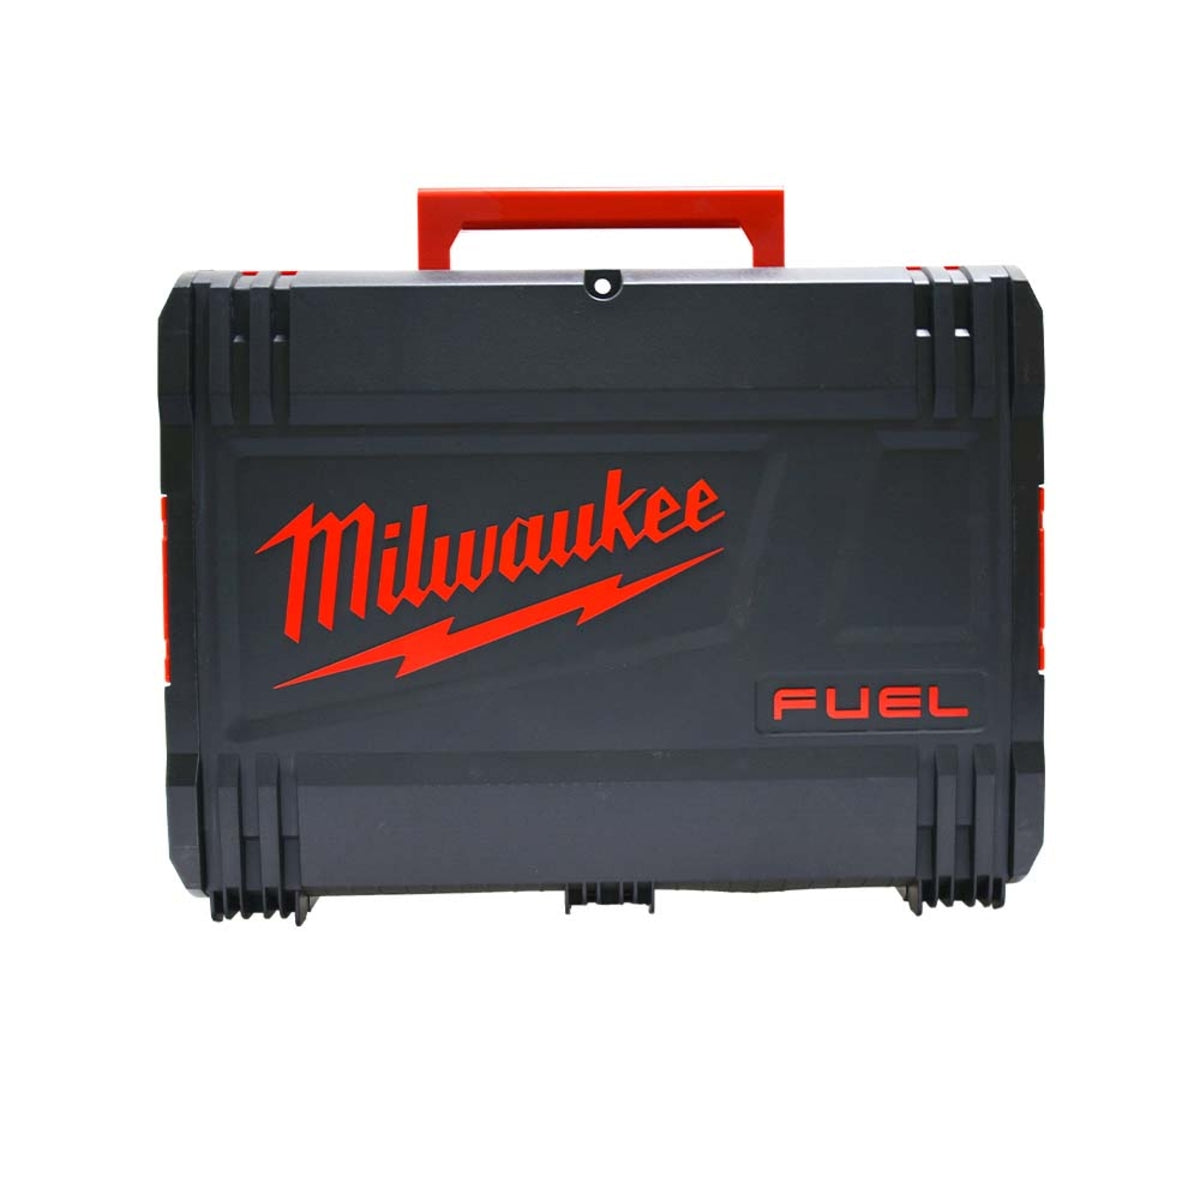 Milwaukee M12FPP2M2-5253X 12V Fuel Brushless SDS+ Drill & Impact Driver with 3 x Batteries Charger & Box 4933492639